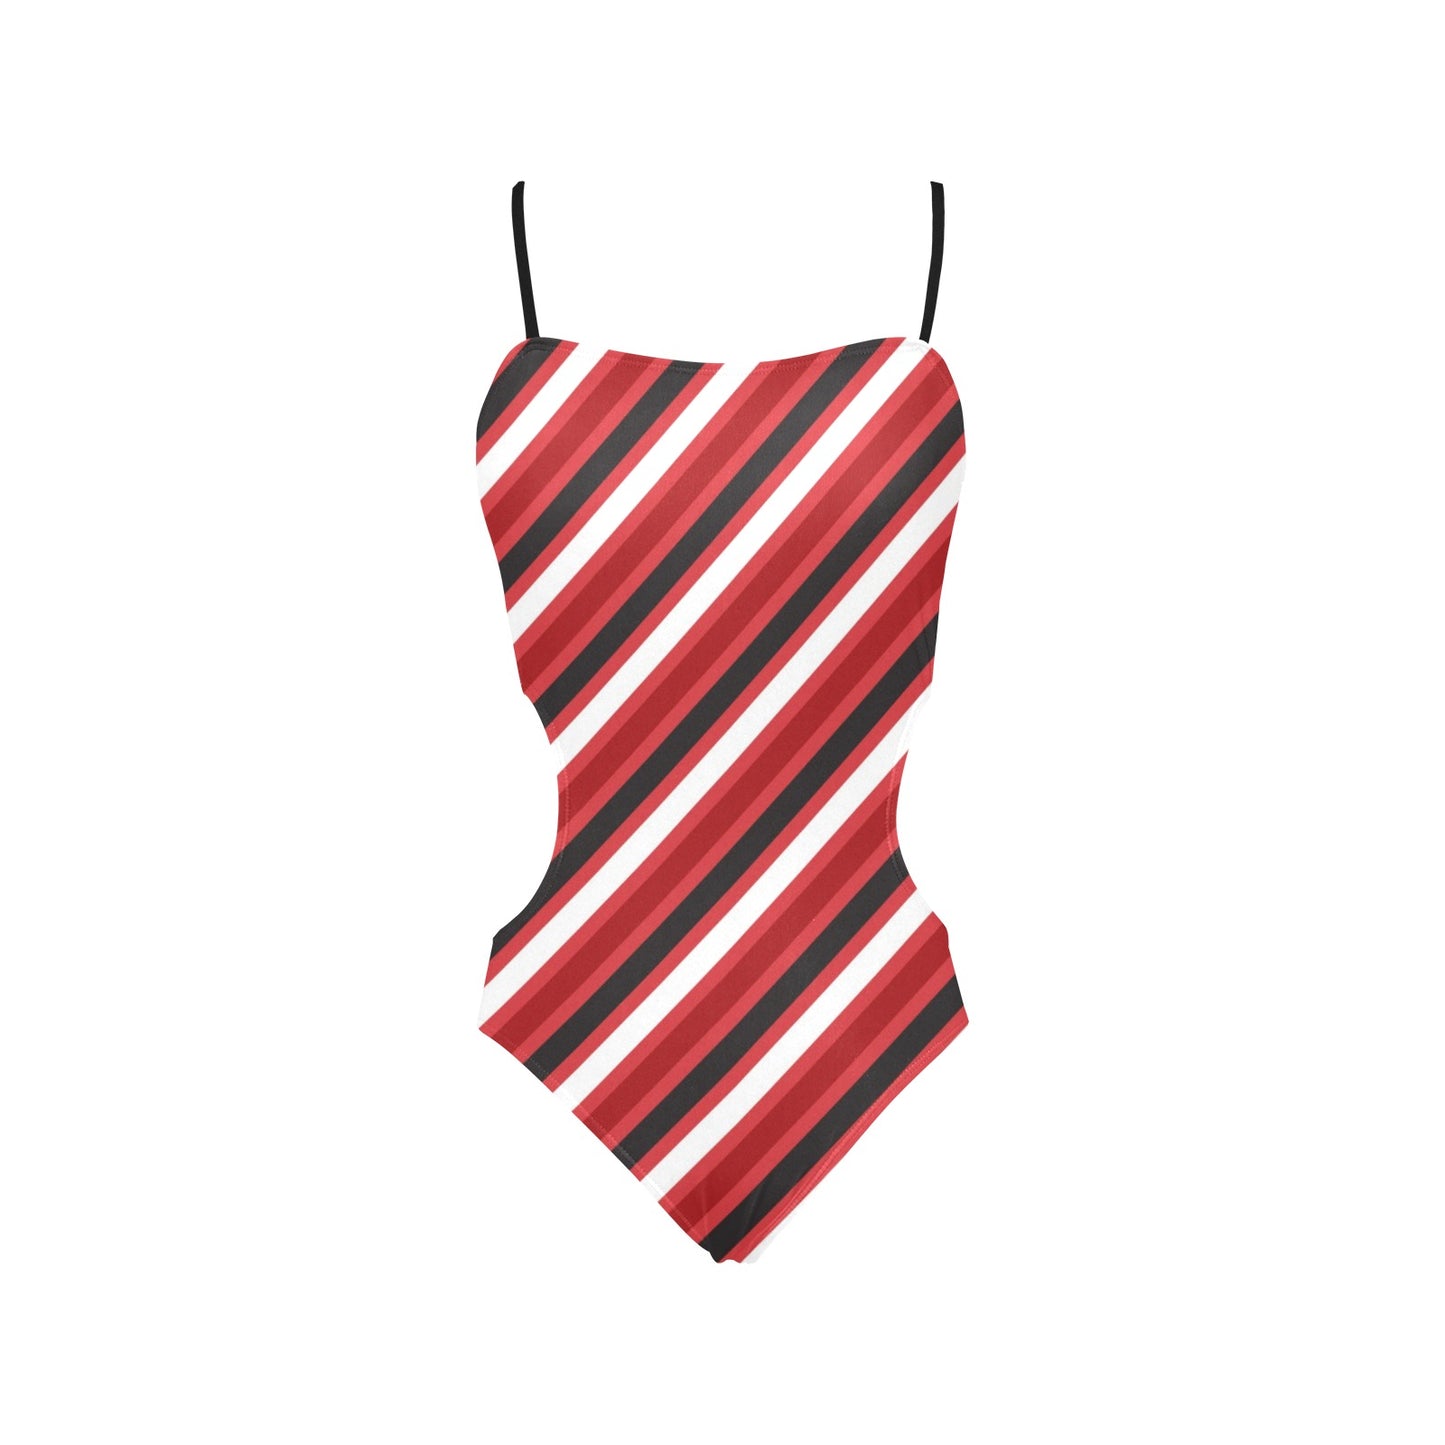 Vintage Stripes Spaghetti Strap Cut Out Sides Swimsuit